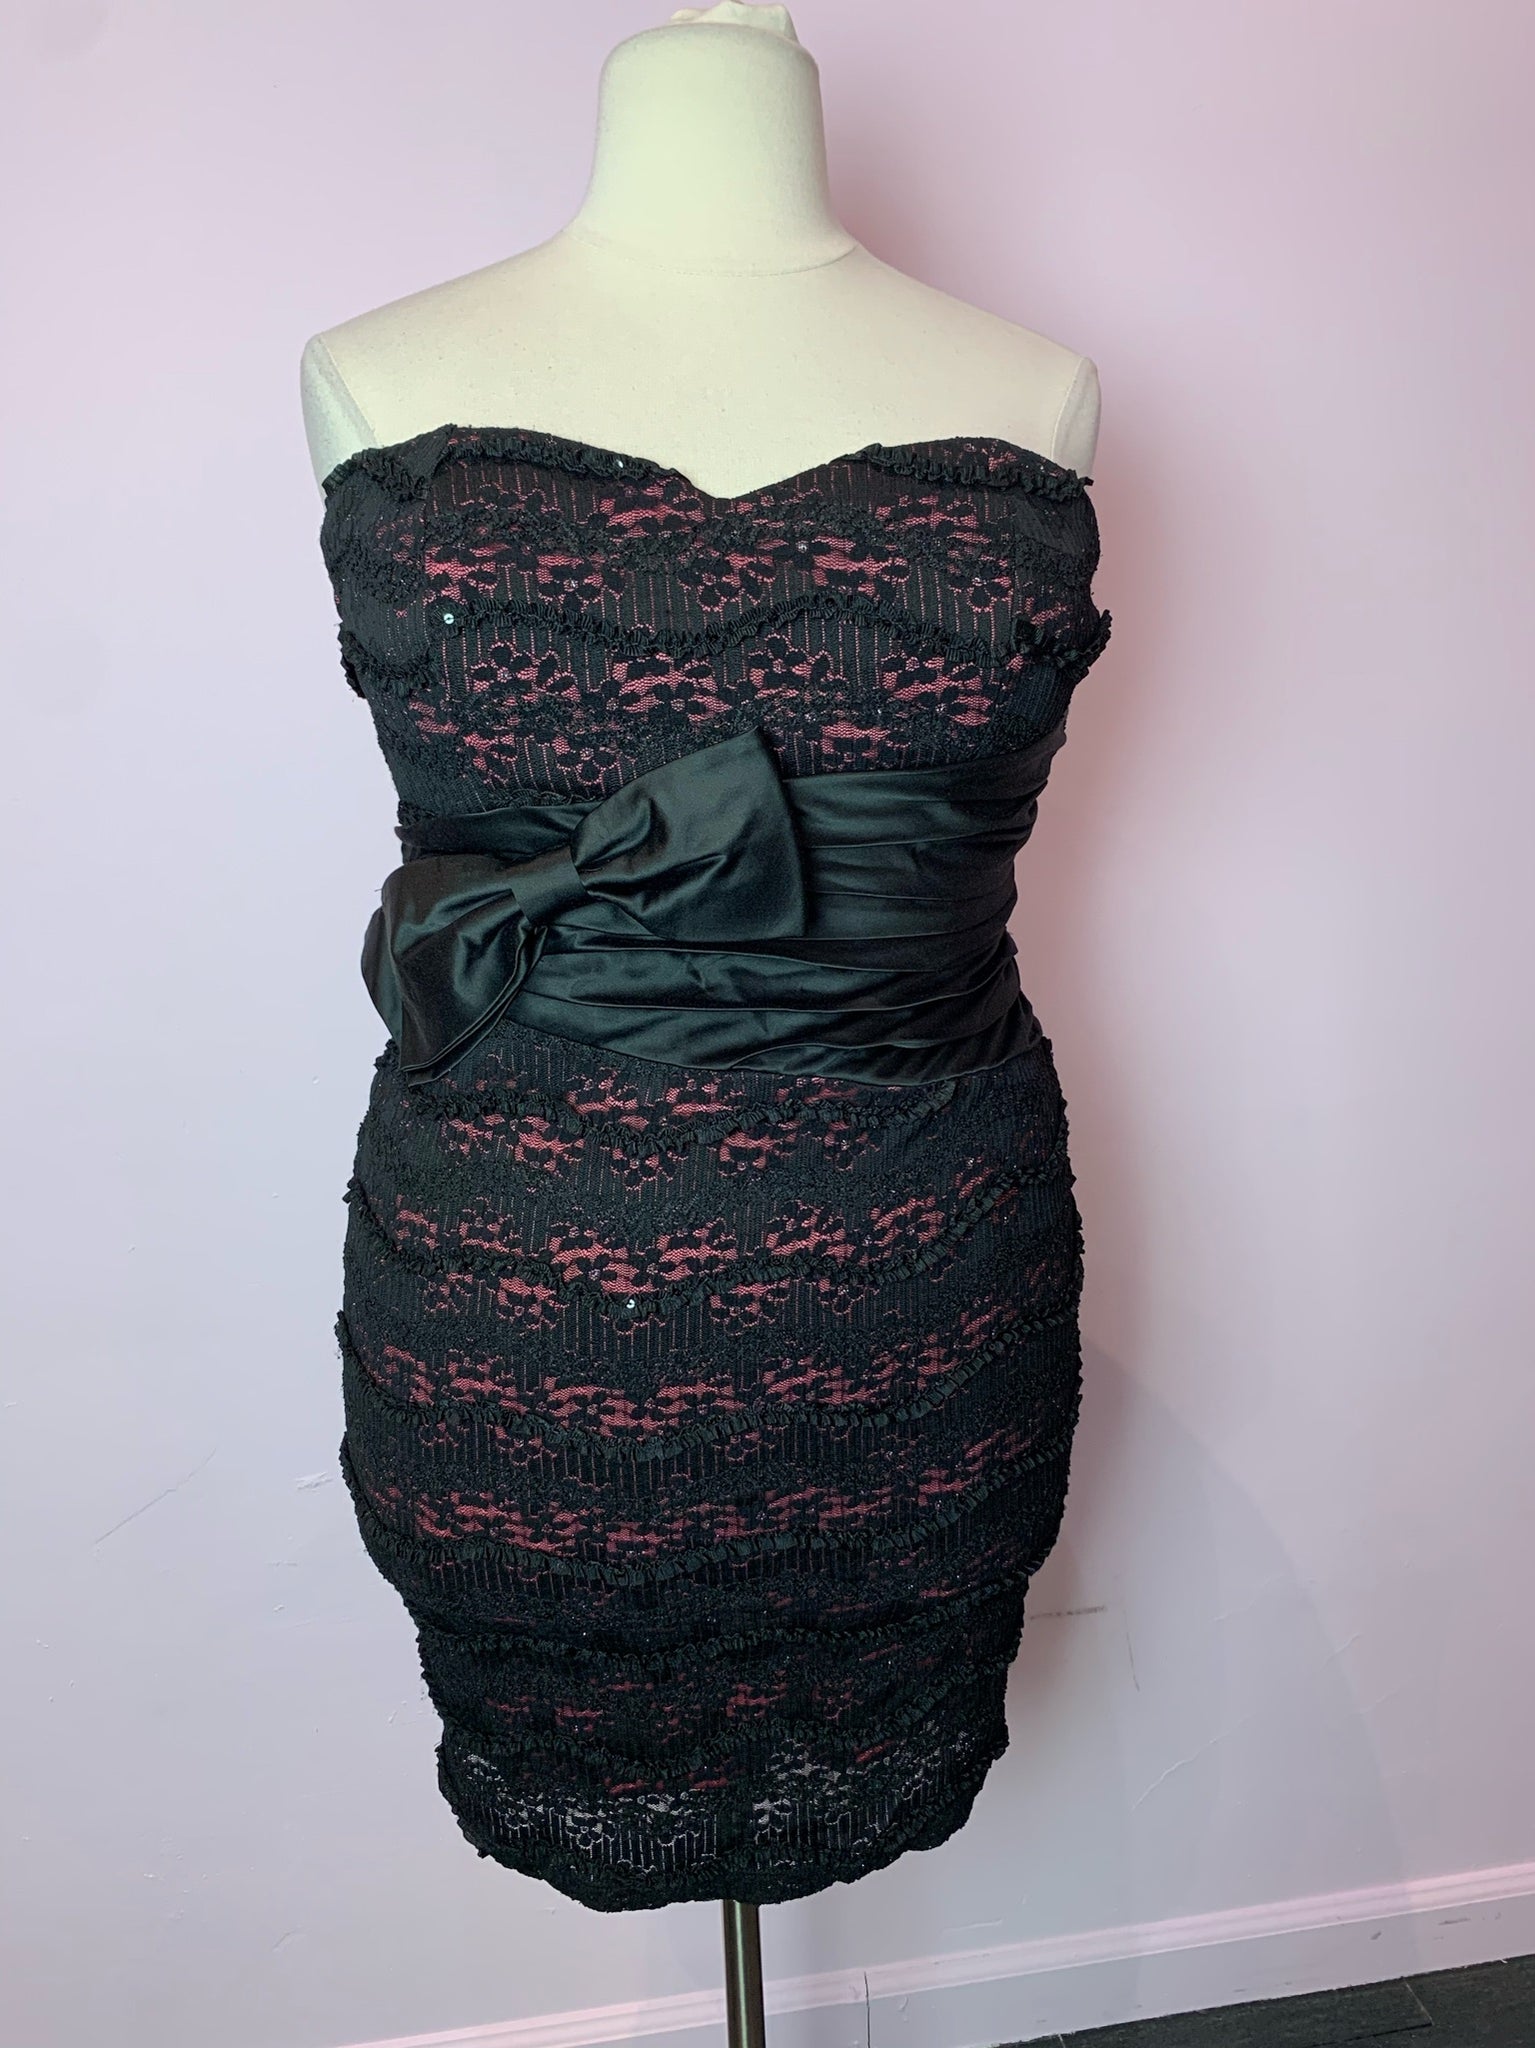 pink dress with black lace overlay